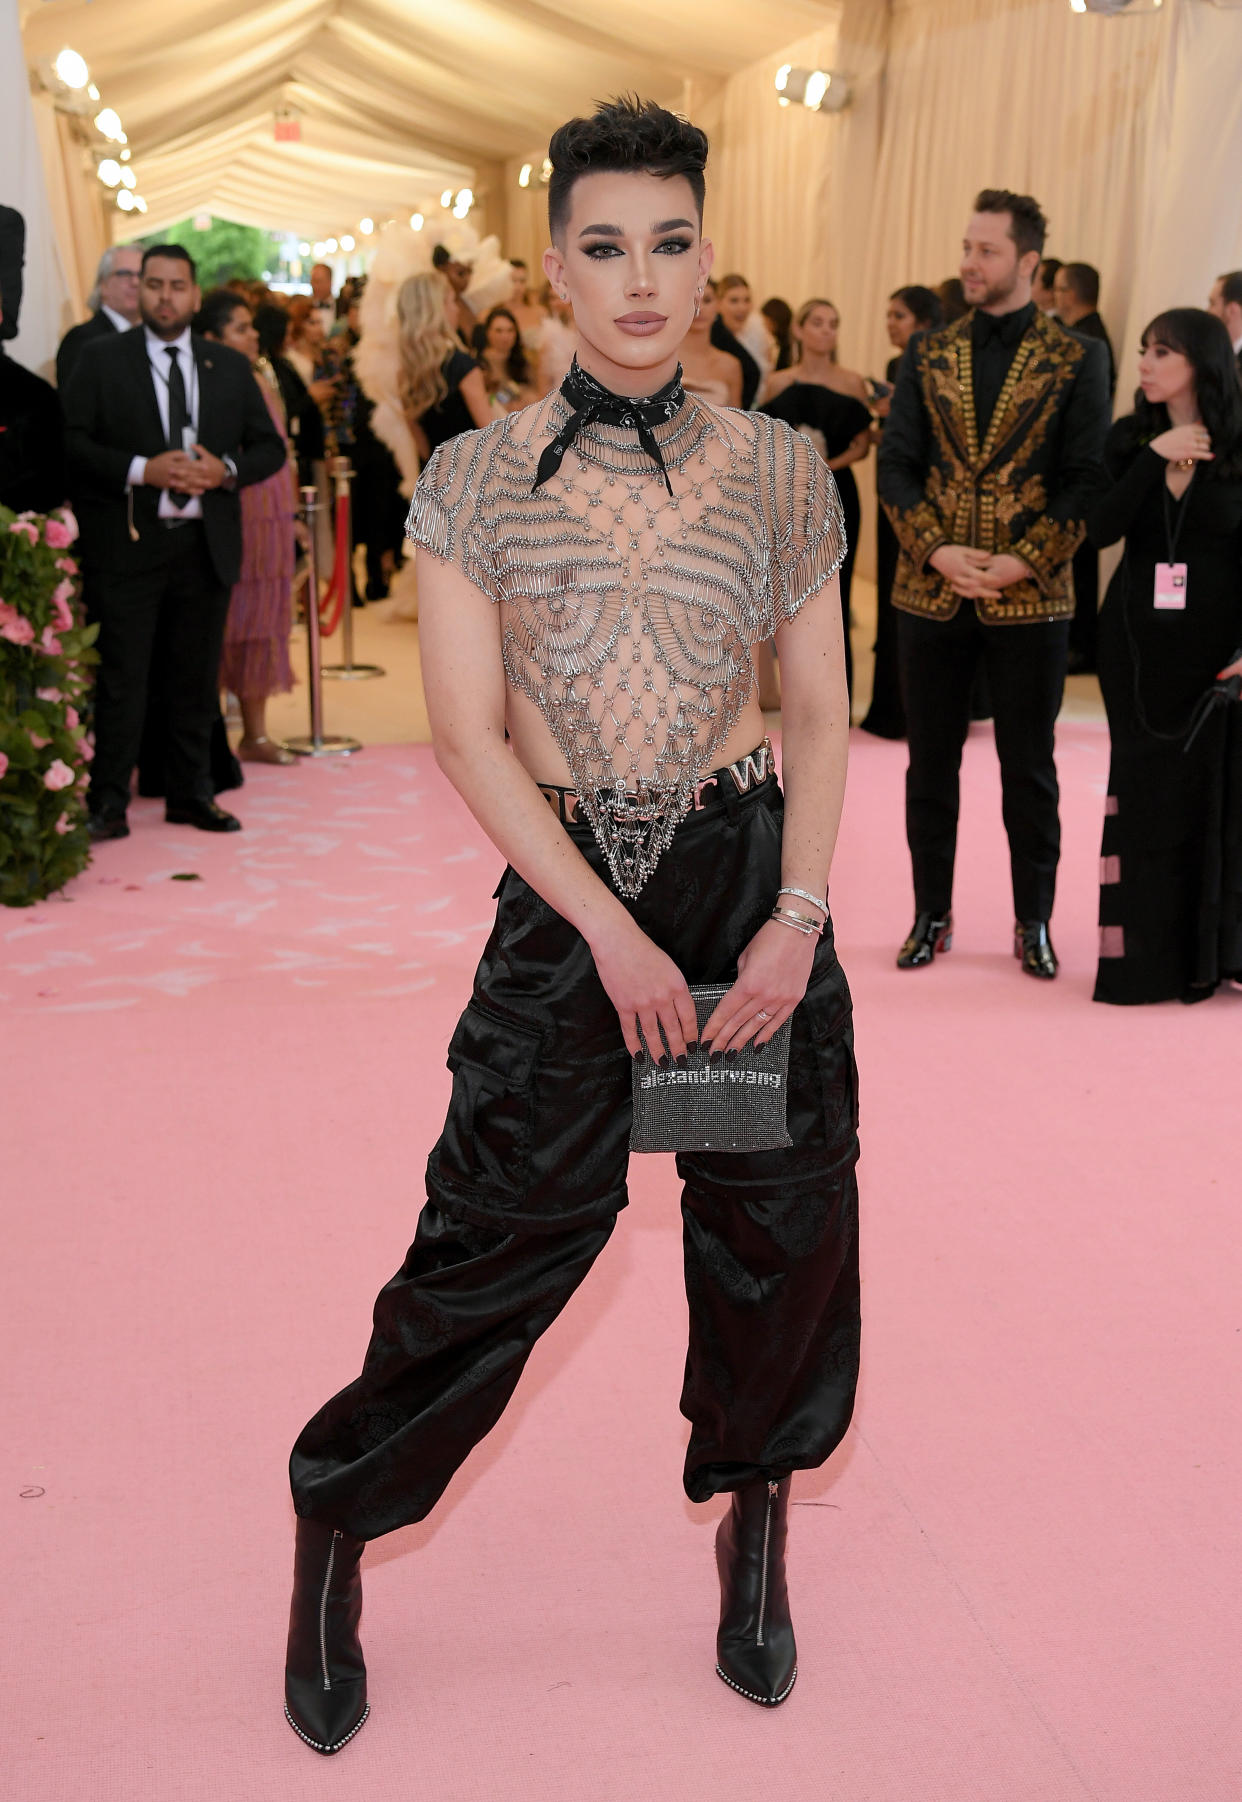 James Charles has lost over 600k followers since hitting the Met Gala red carpet earlier this week. Photo: Getty Images